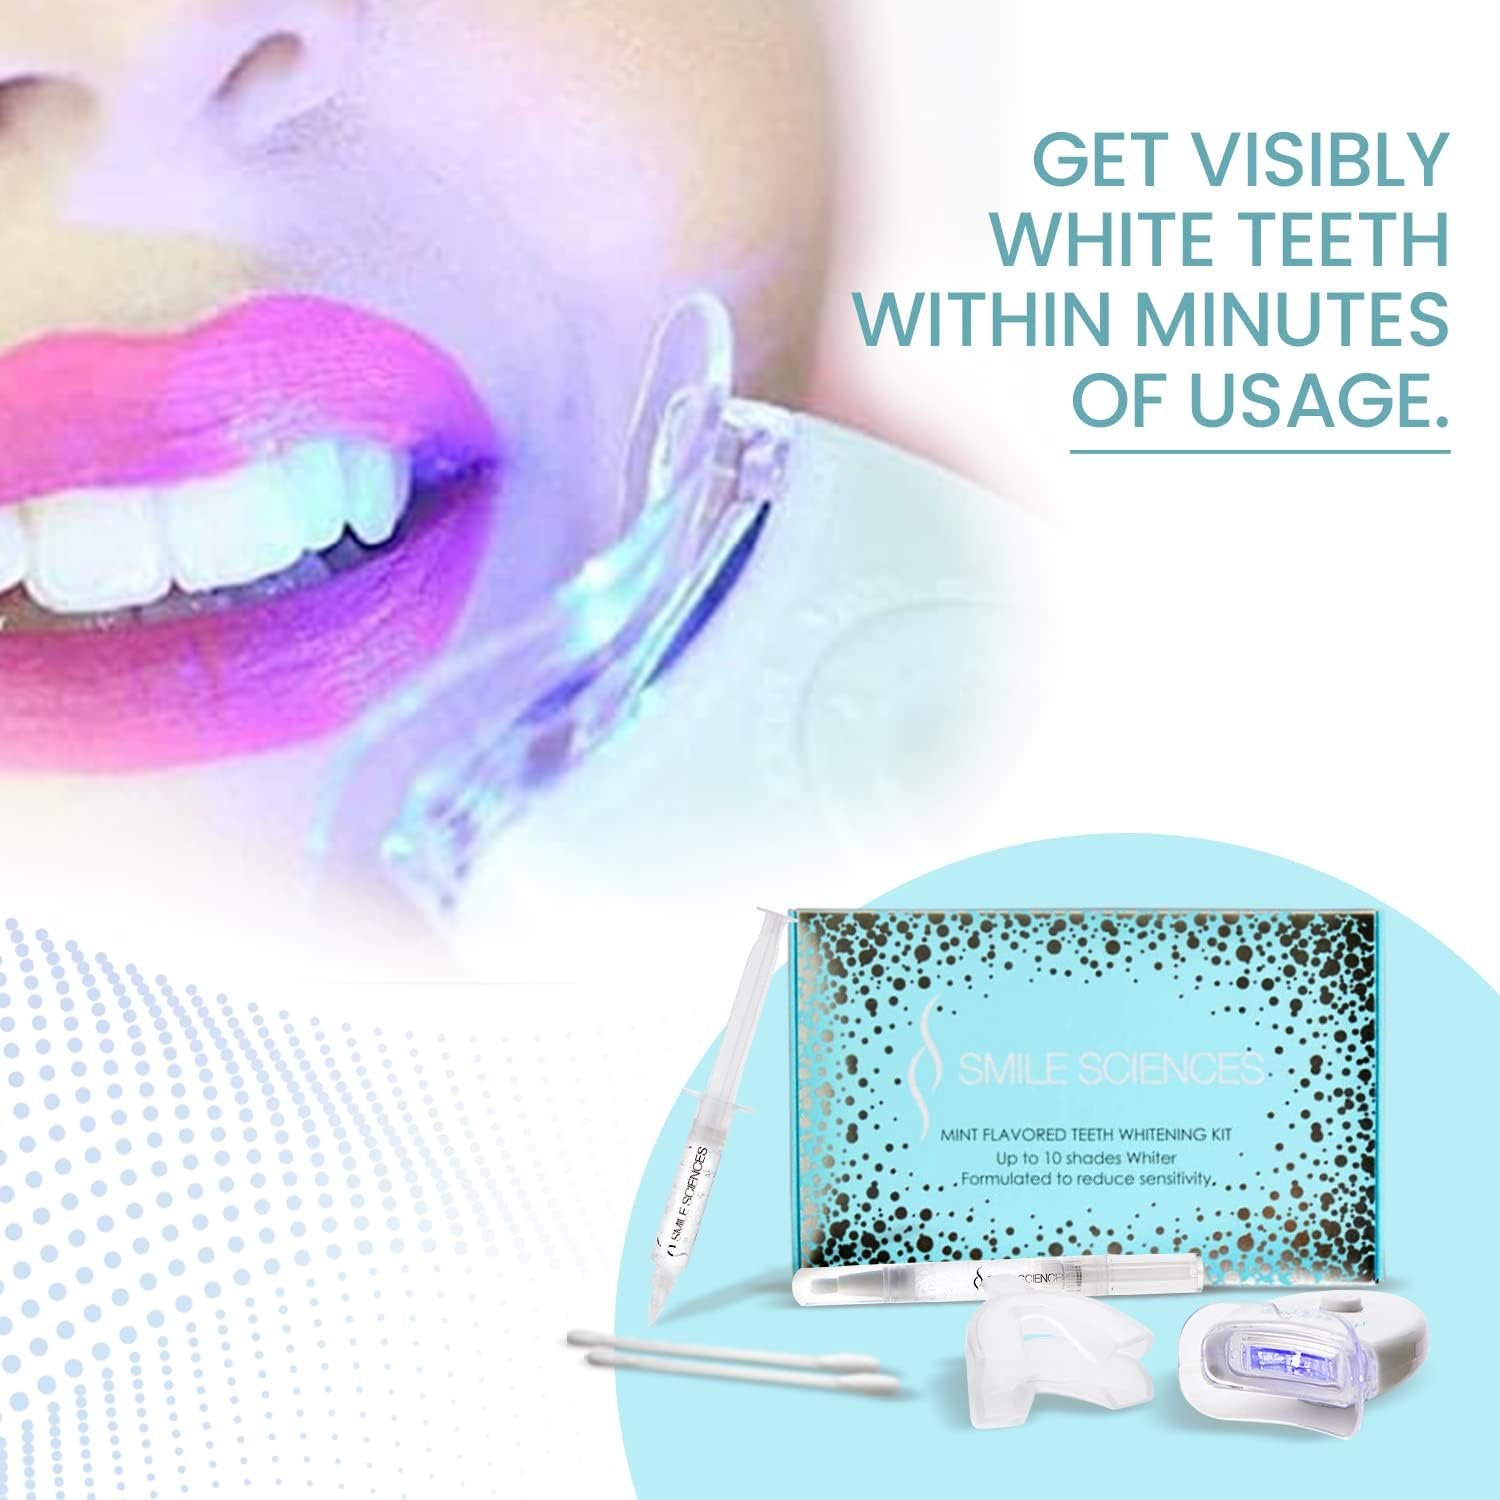 Smile Sciences Teeth Whitening Kit for Whiter and Brighter Smile with 5X LED Light Tooth Whitener,Gel Syringes, Mouth Trays and Teeth whitening Pen (Peppermint Kit)